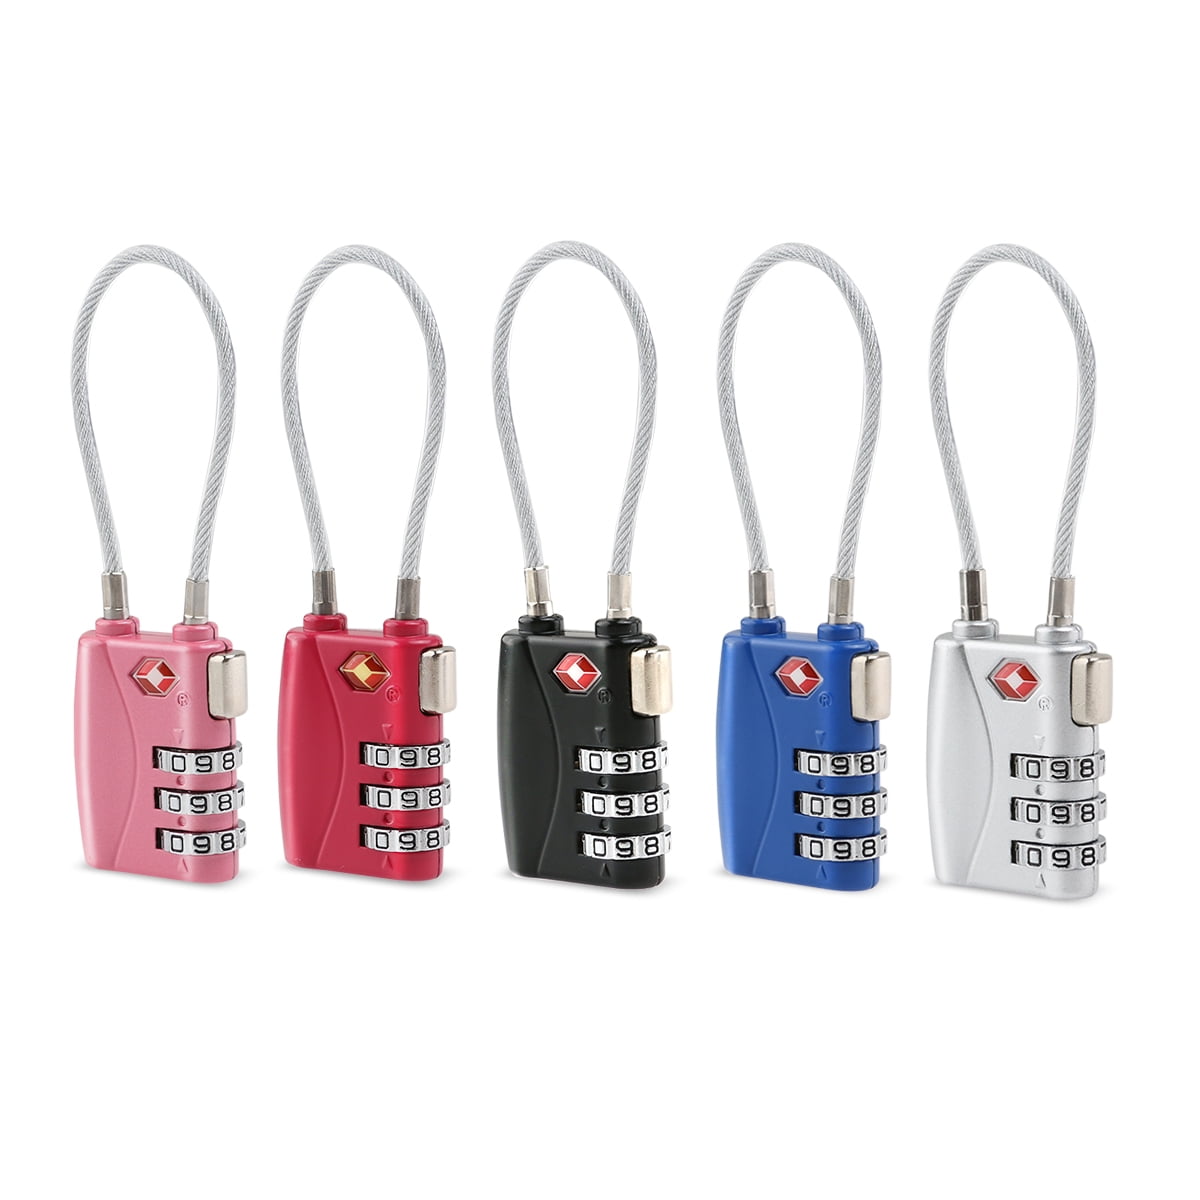 Tinksky 4-digit Combination Coded Lock Resettable Padlock for Suitcase Luggage Case Bag 